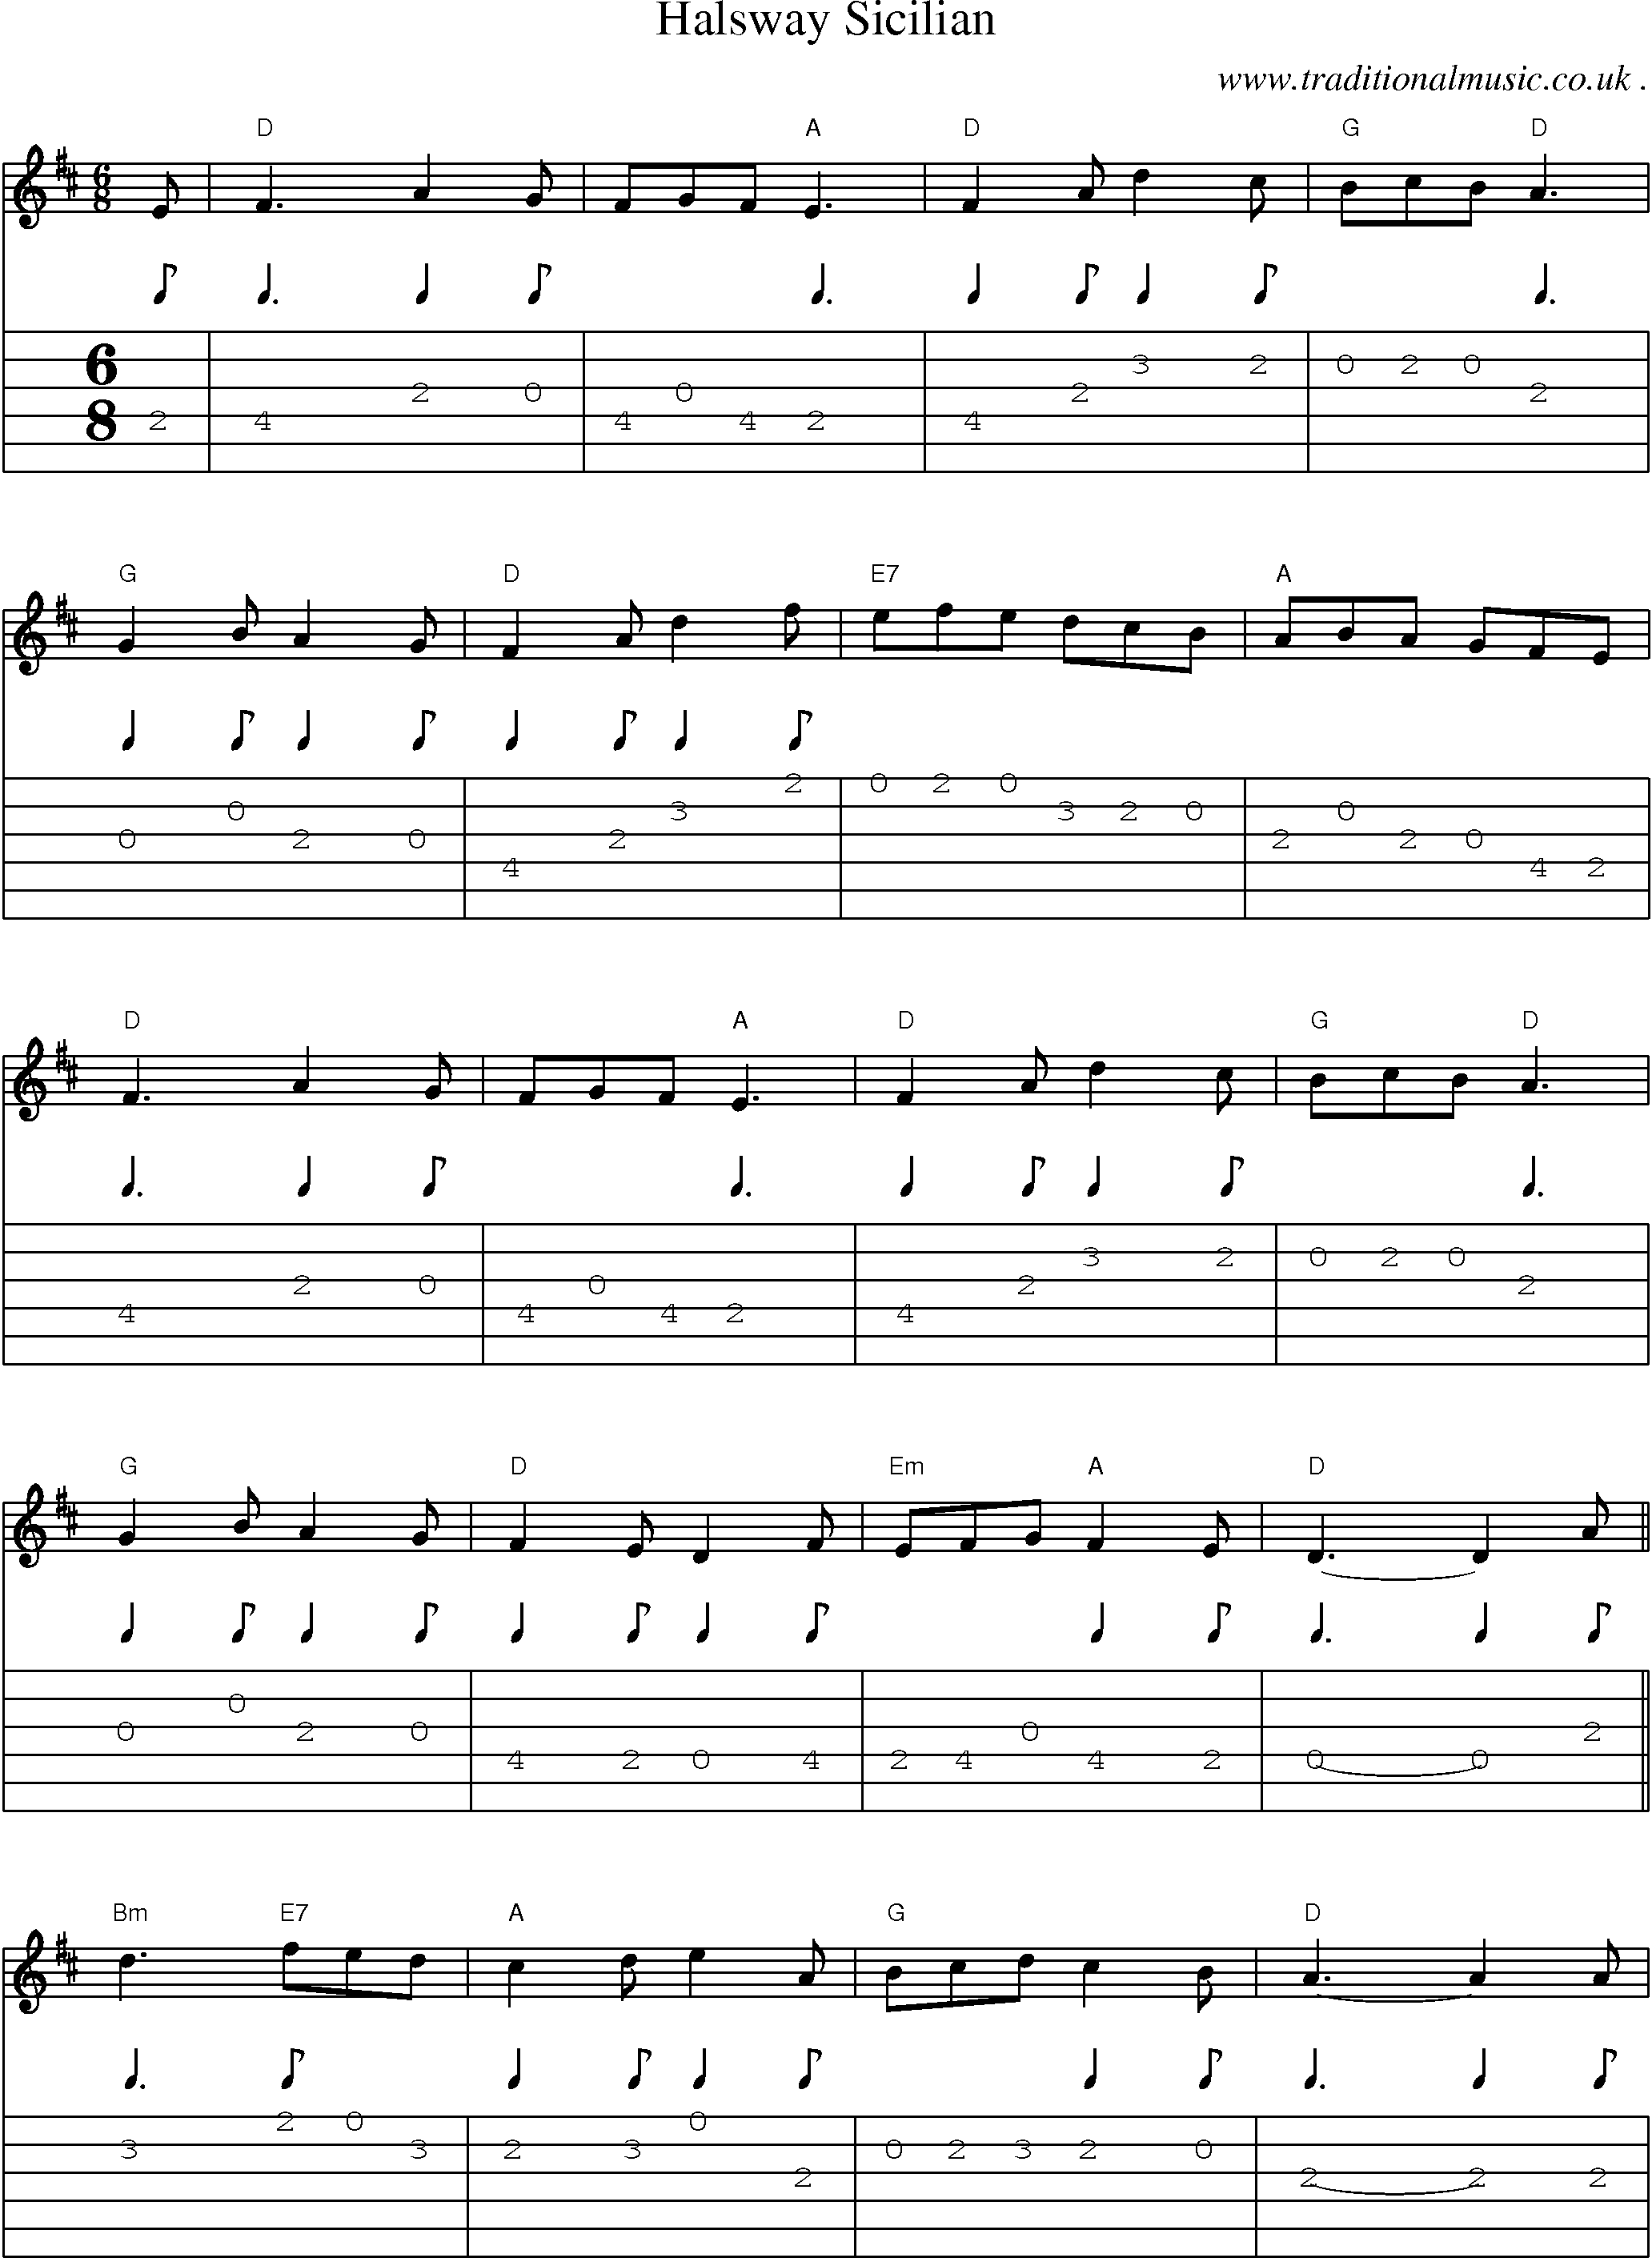 Sheet-Music and Guitar Tabs for Halsway Sicilian